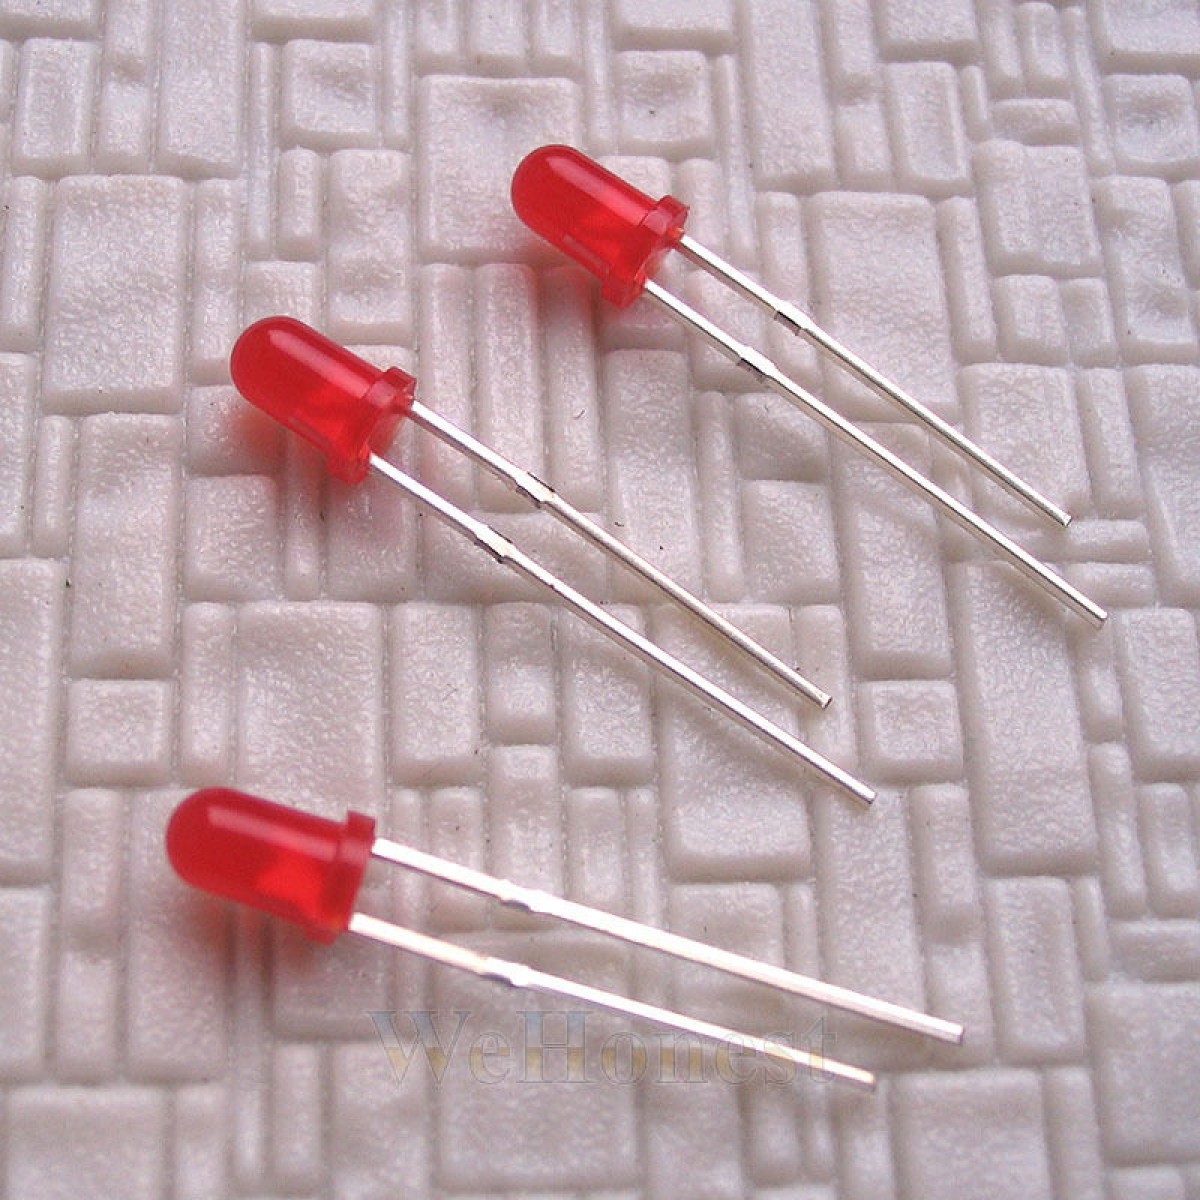 20 x Auto self Flash LEDs 3mm Red without extra circuit Frequency = 1 second